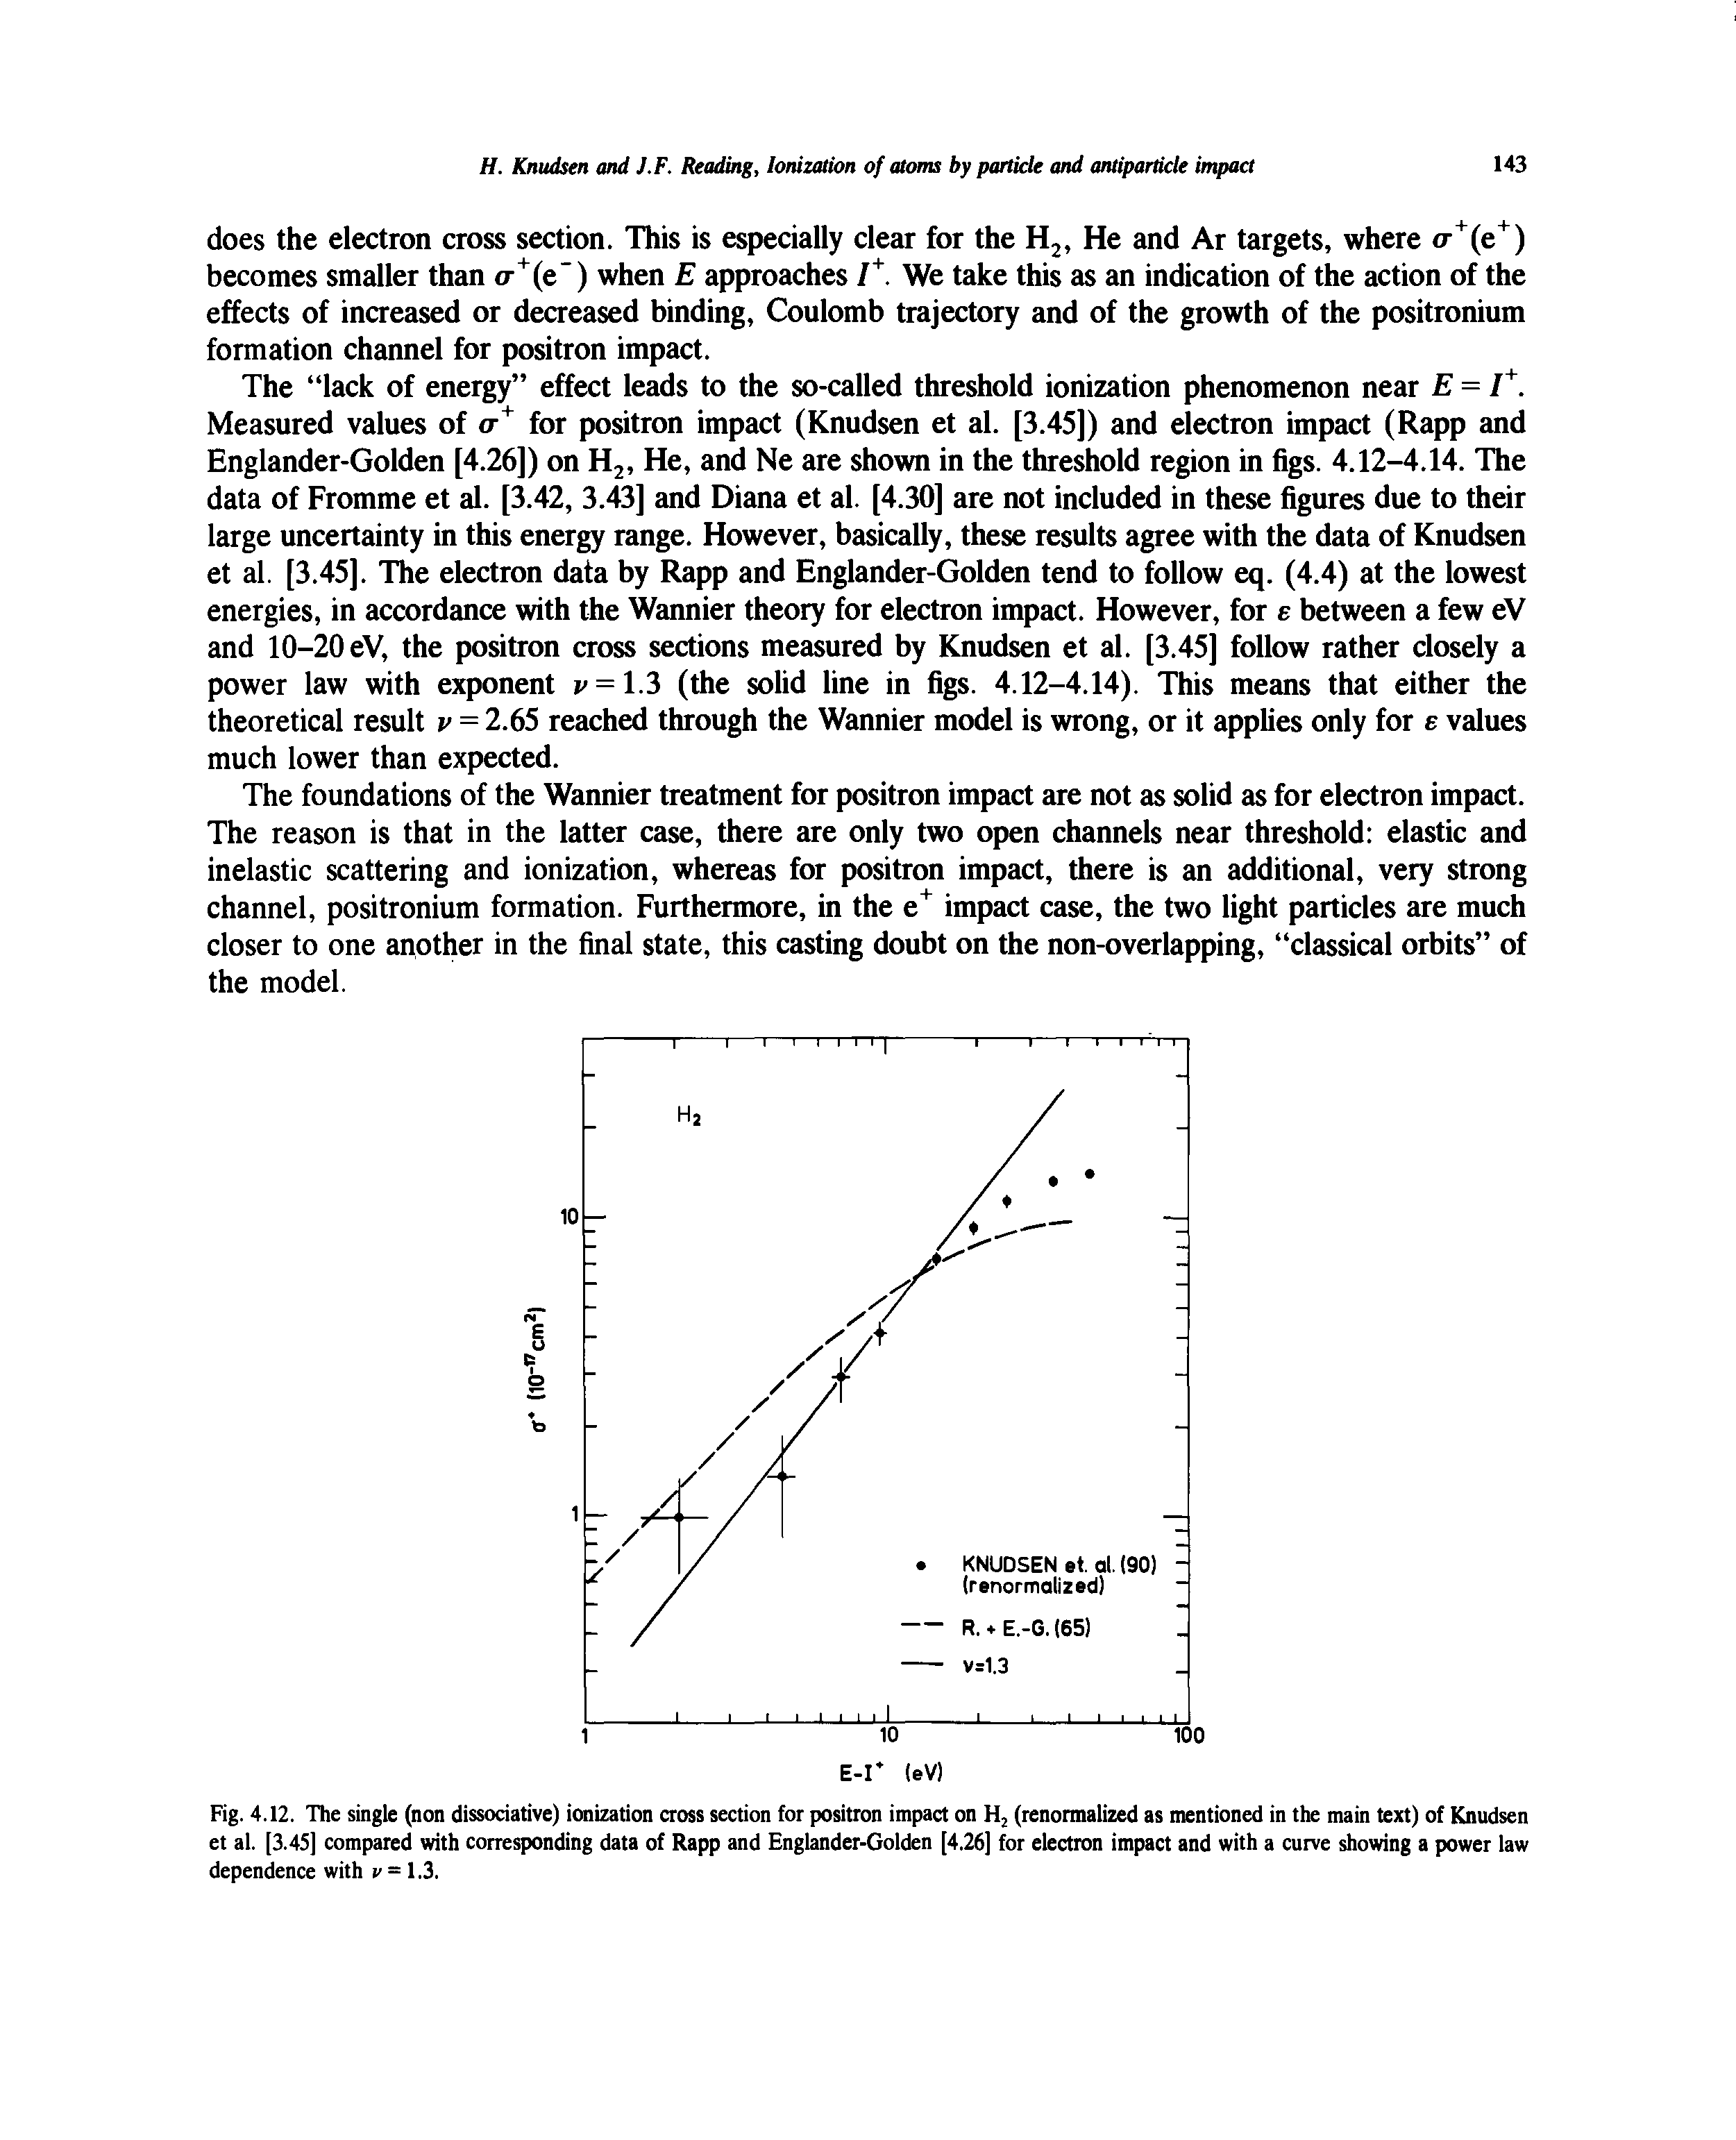 Fig. 4.12. The single (non dissociative) ionization cross section for positron impact on Hj (renormalized as mentioned in the main text) of Knudsen et al. [3.45] compared with corresponding data of Rapp and Englander-Golden [4.26] for electron impact and with a curve showing a power law dependence with > = 1.3.